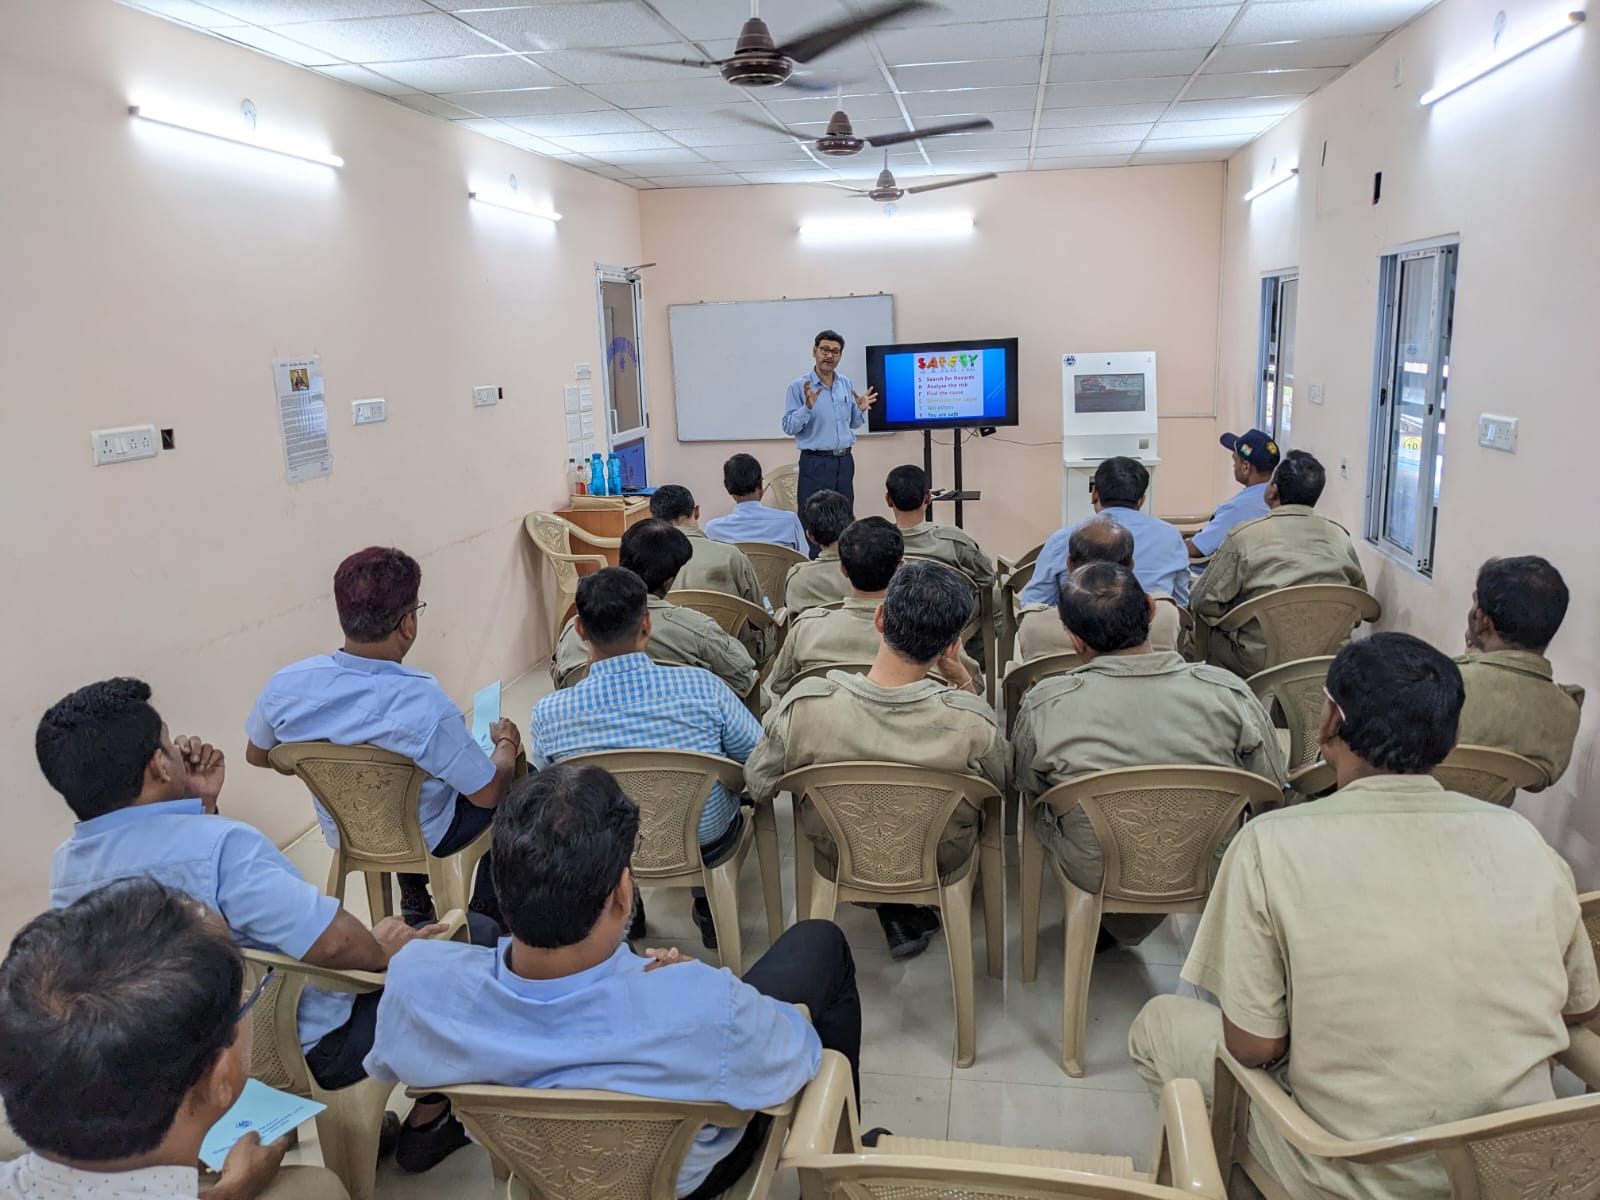 Image 1 - Safety Training through GSTK for employees at FOJ Unit on 25 Mar 23